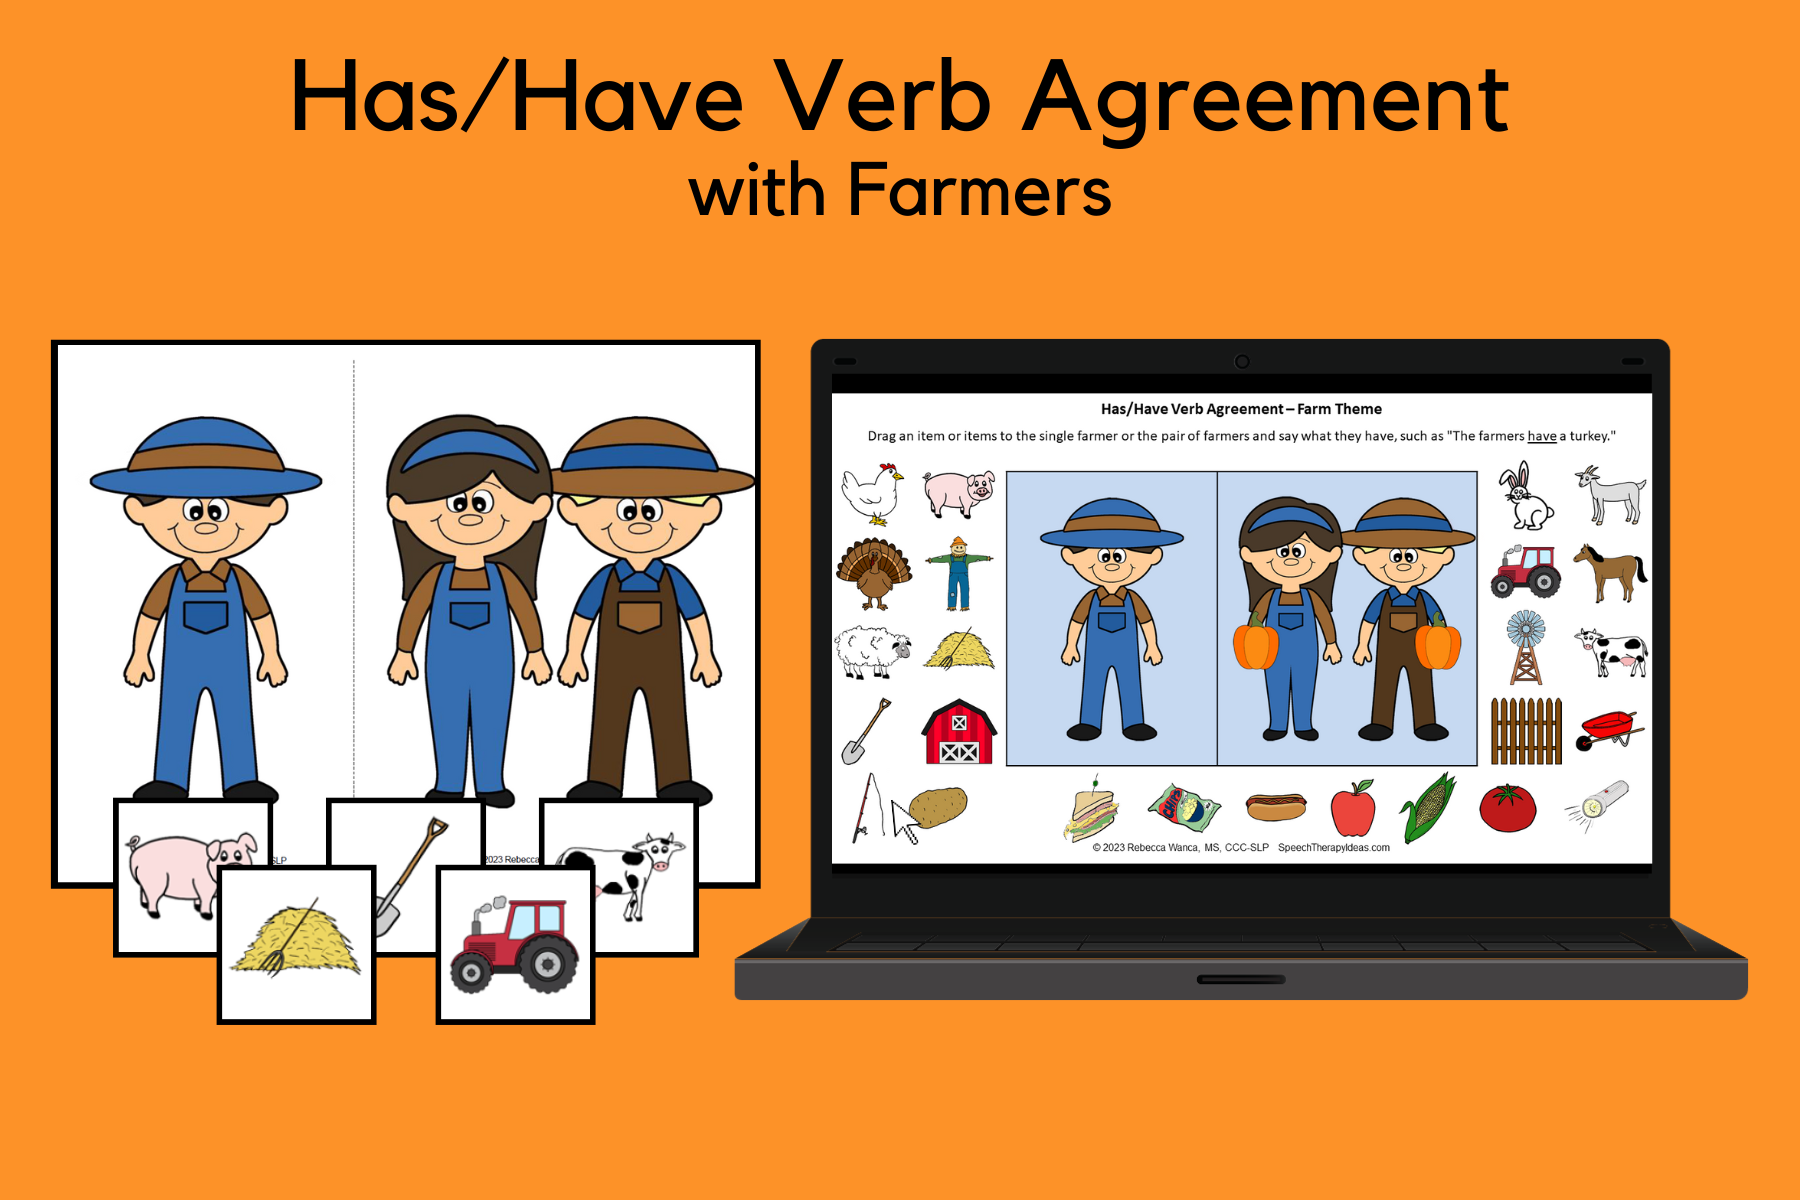 Has/Have Verb Agreement with Farmers